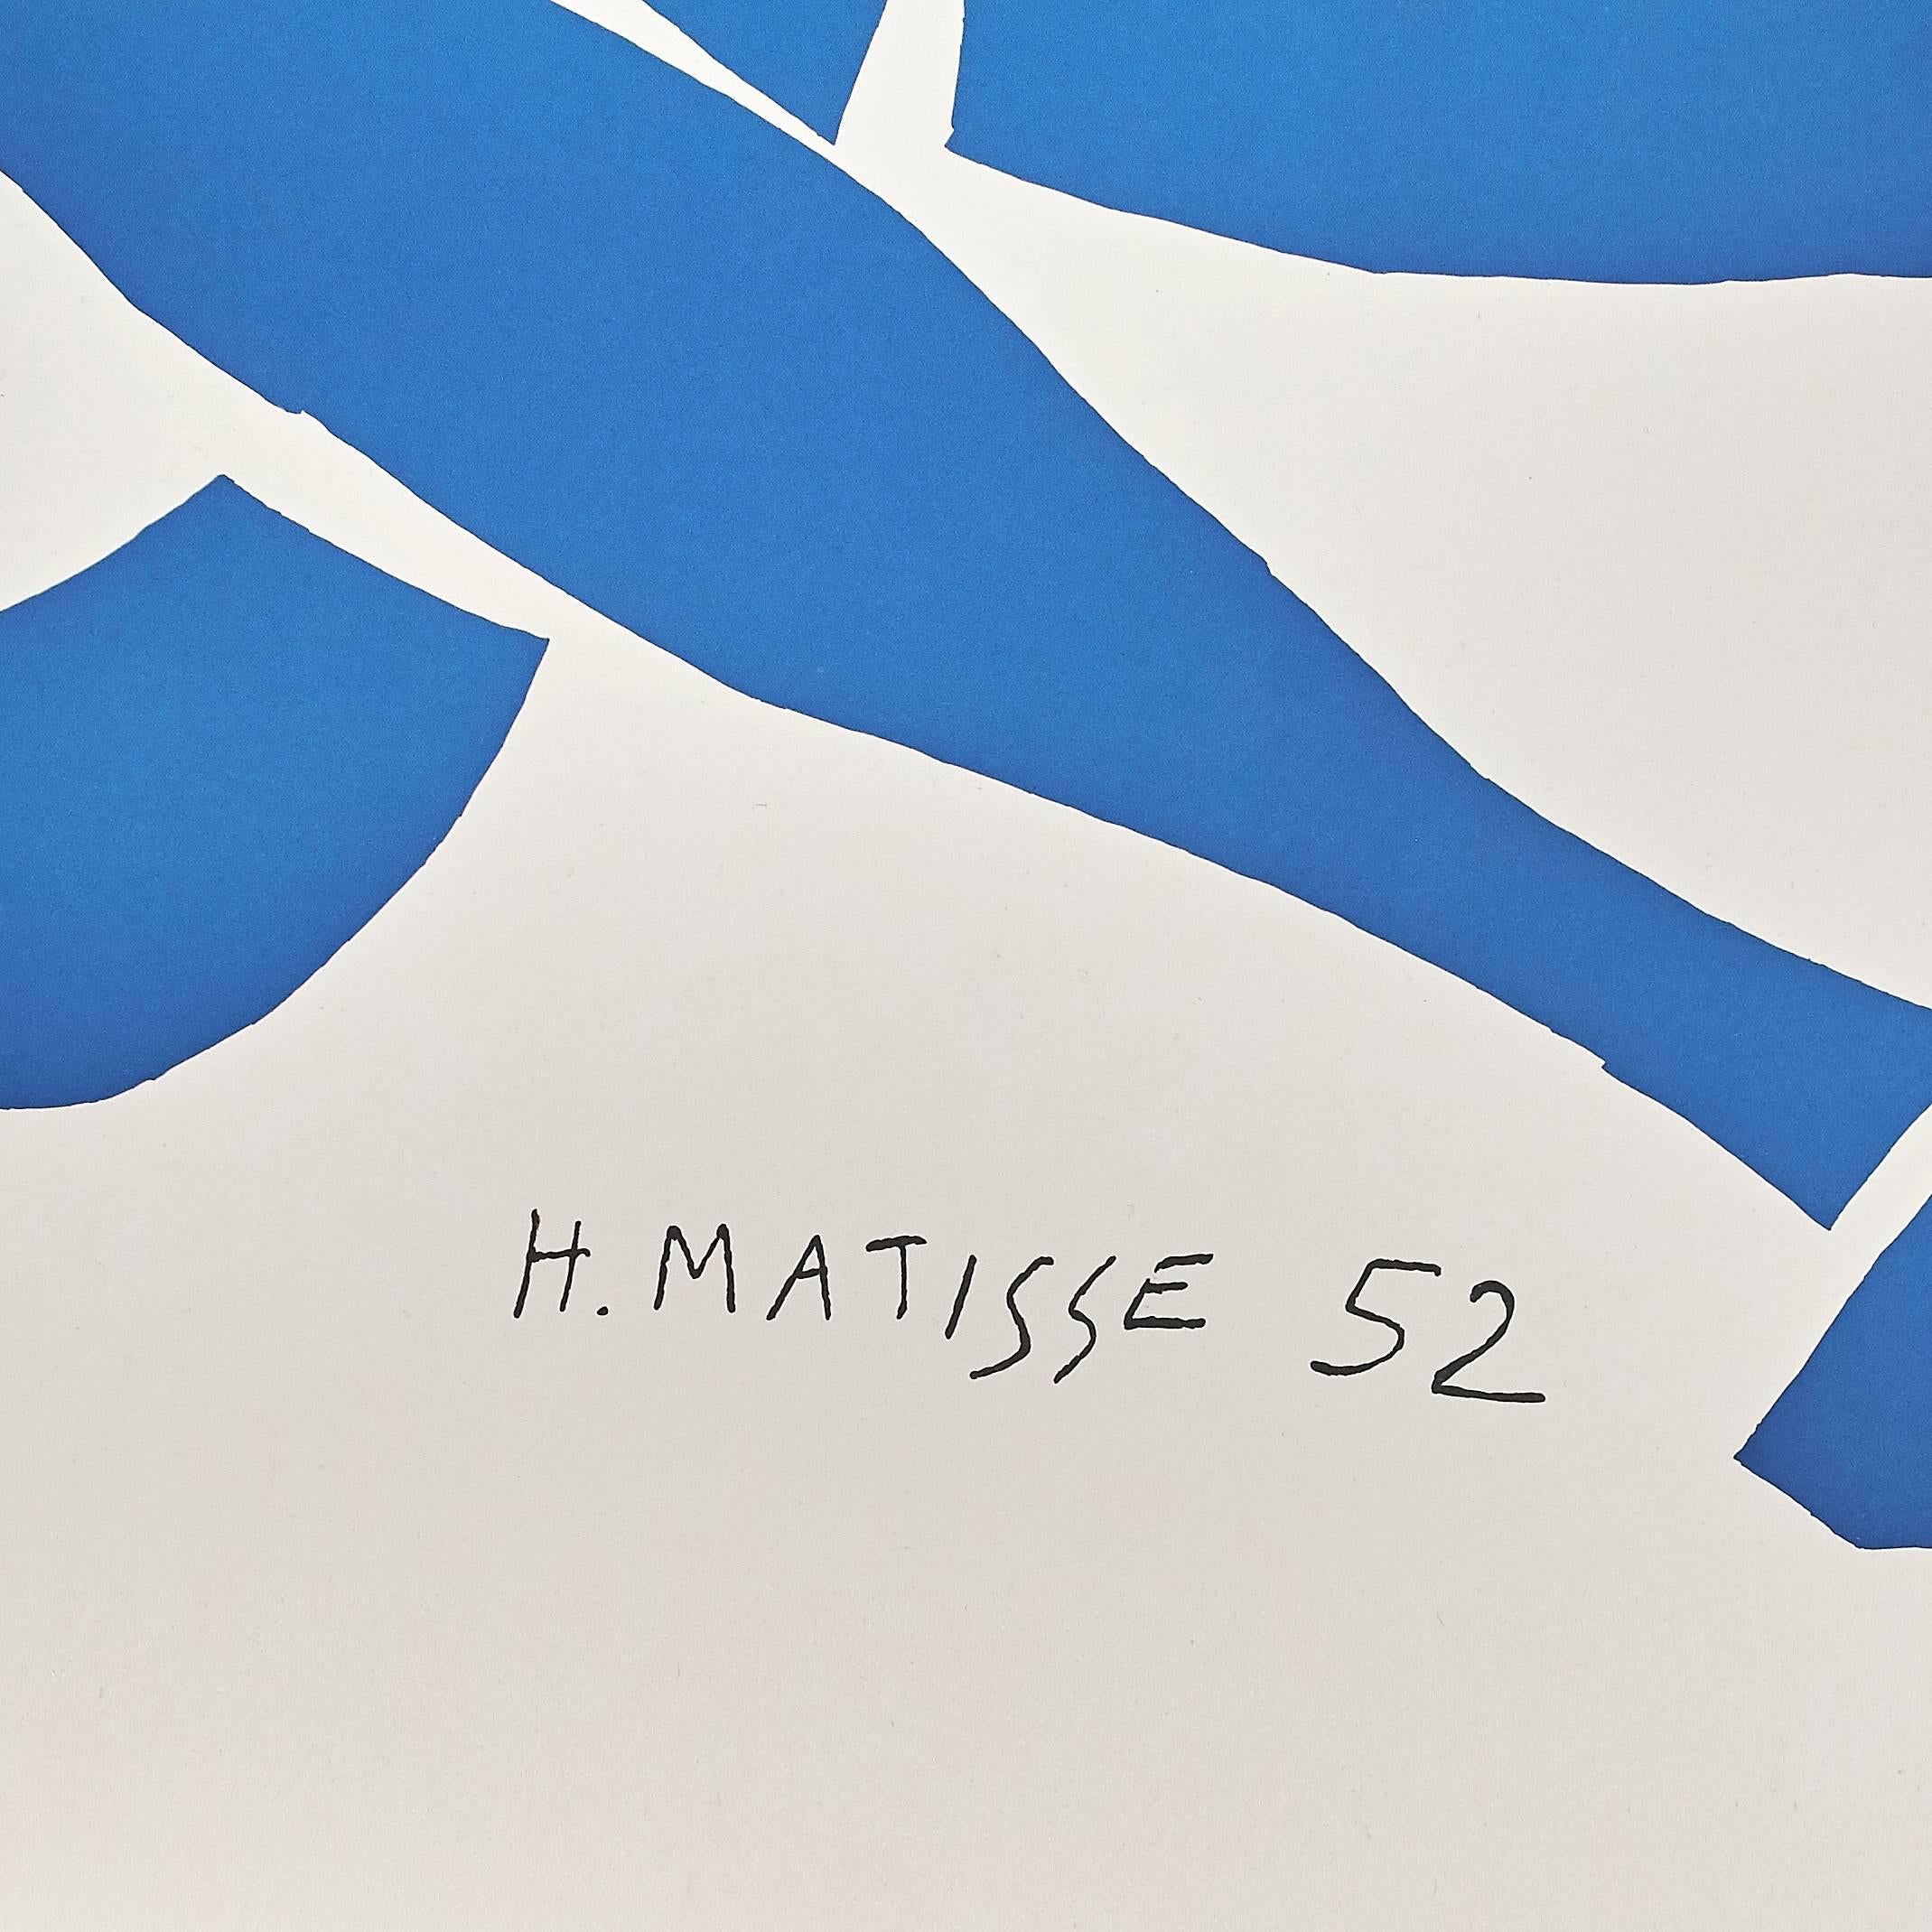 Color lithograph after the work by Henri Matisse,

Signed in the stone, as issued
Published posthumously by the estate
Edition of 200
Measures: 76 x 56 cm

Henri Matisse whether working as a draftsman, a sculptor, a printmaker or a painter